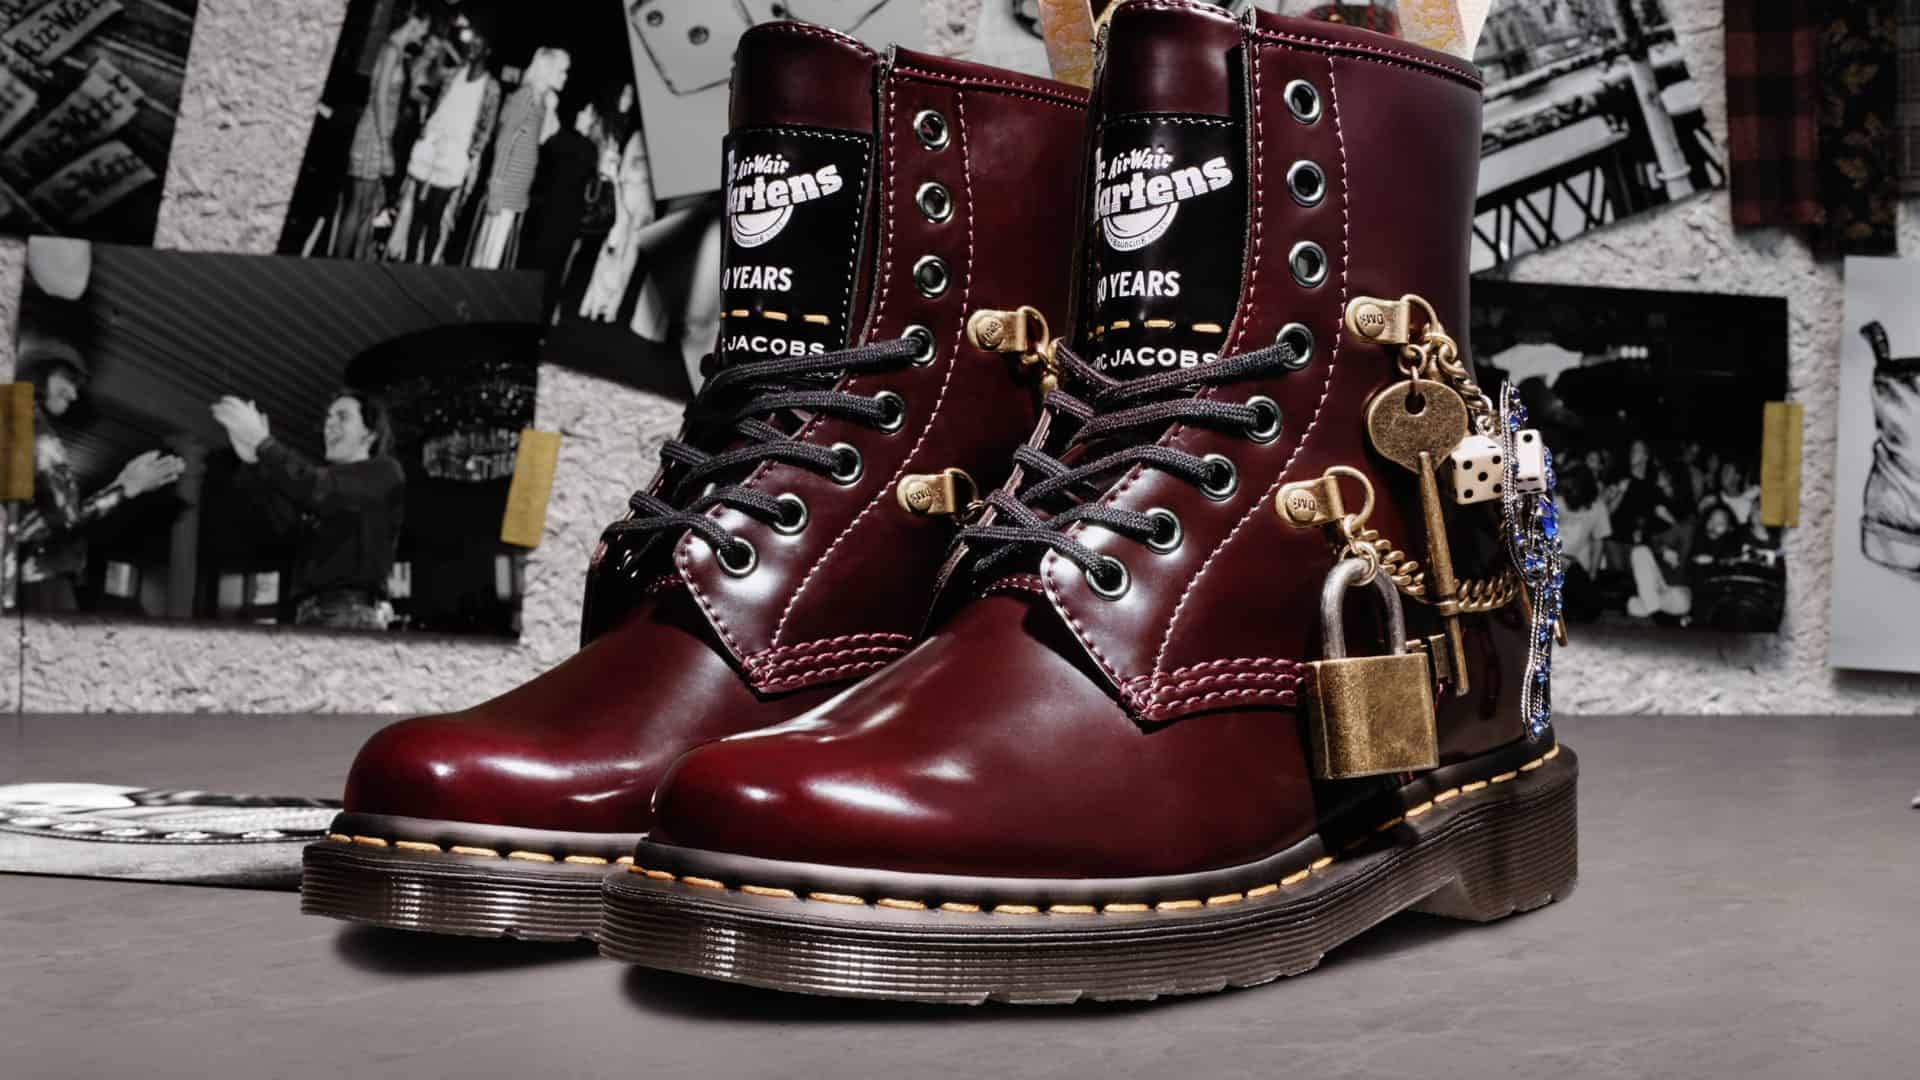 DR. MARTENS COLLABORATES WITH MARC JACOBS ON NEW BOOT - MR Magazine